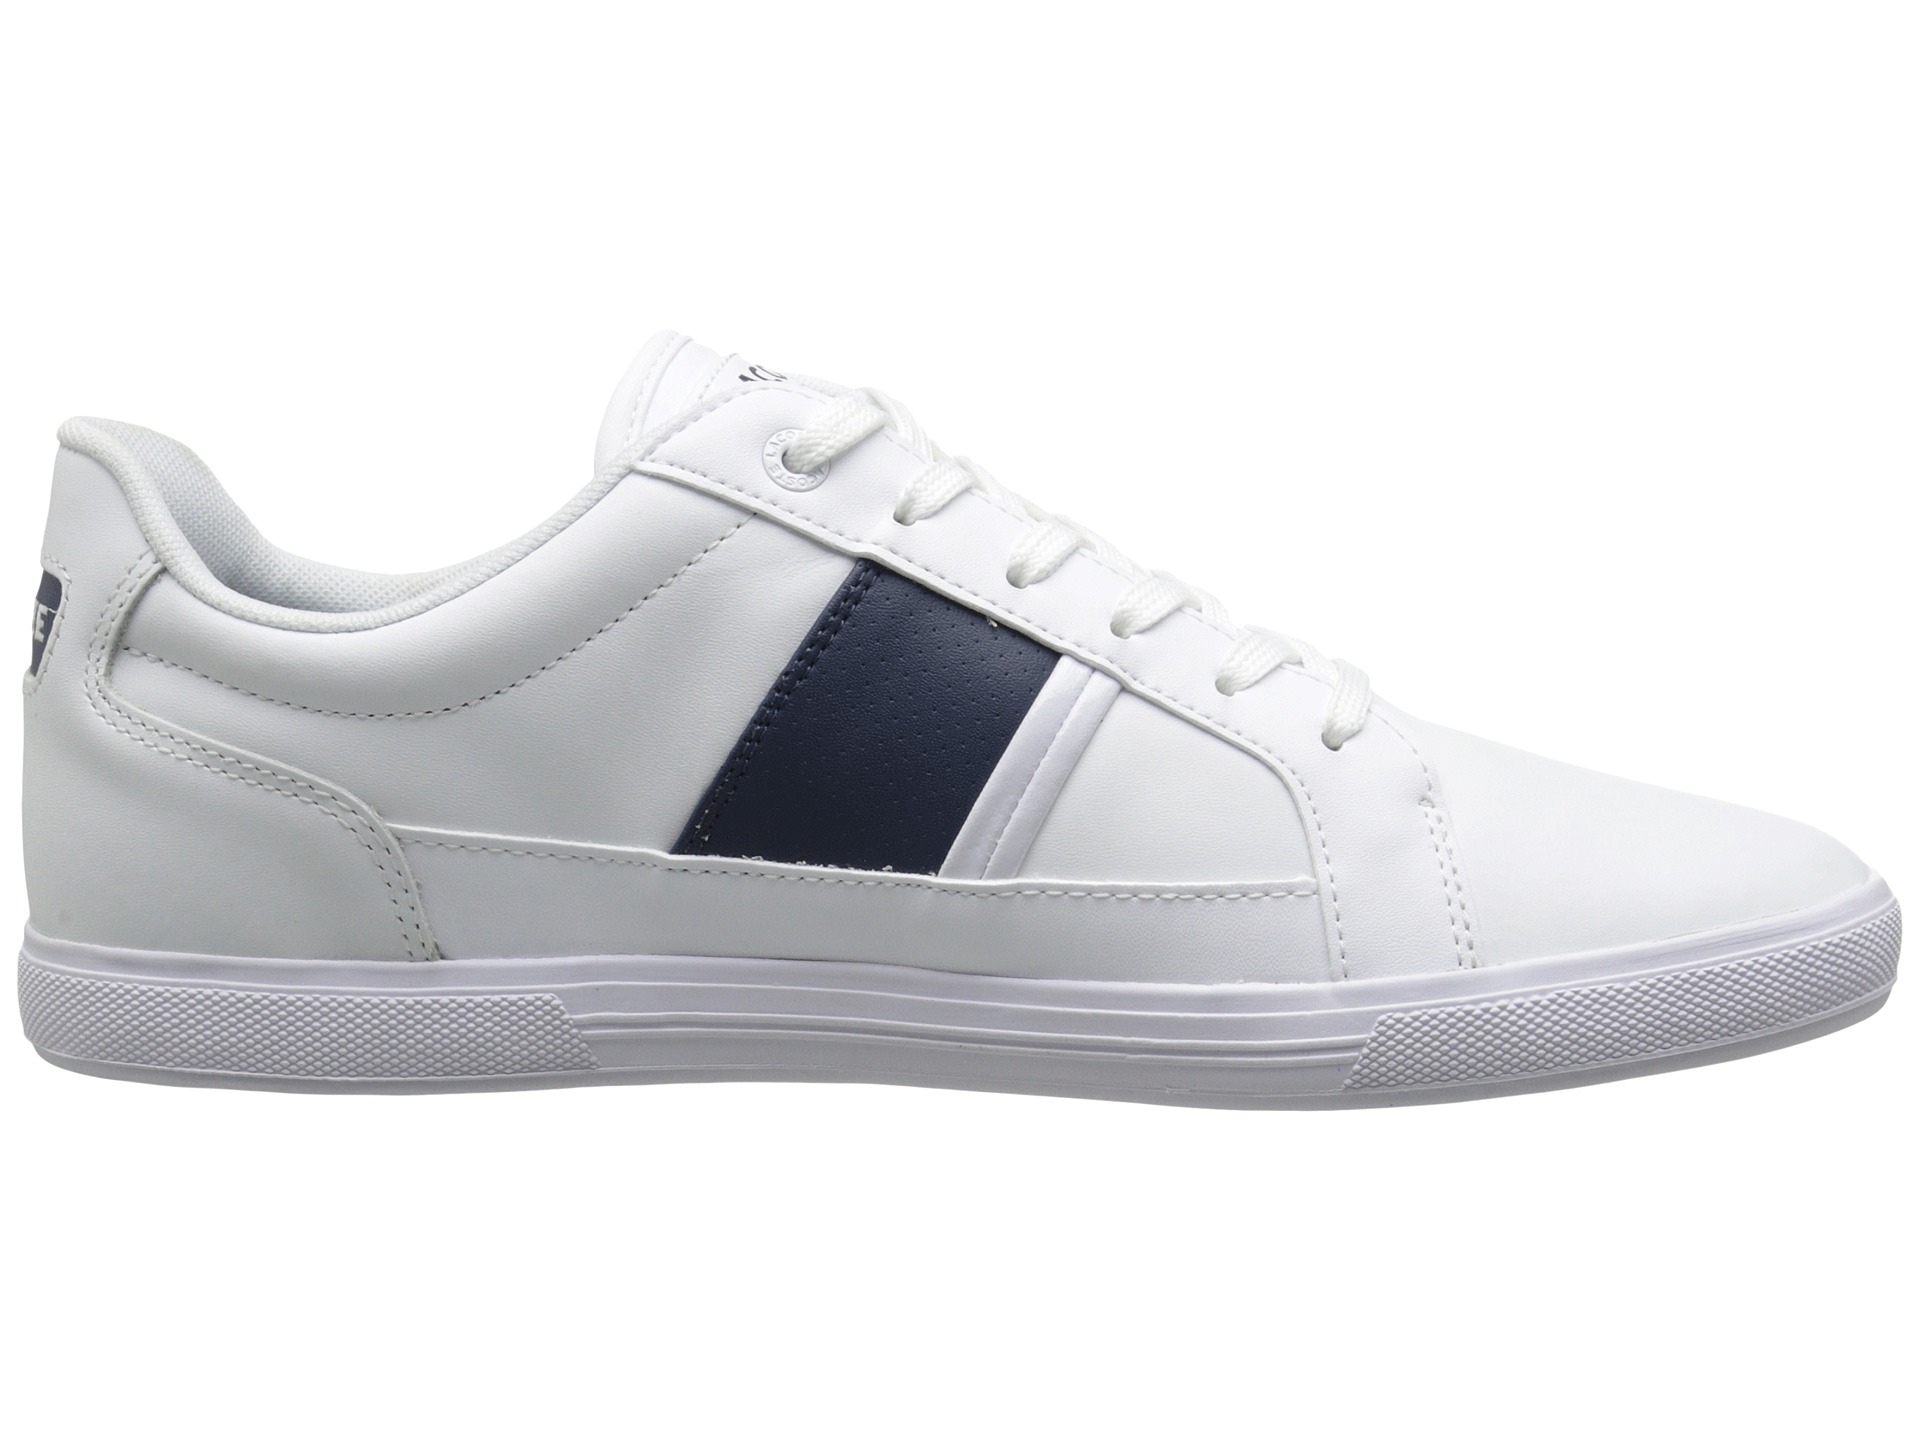 Lacoste Europa Lcr - Zappos Free Shipping BOTH Ways